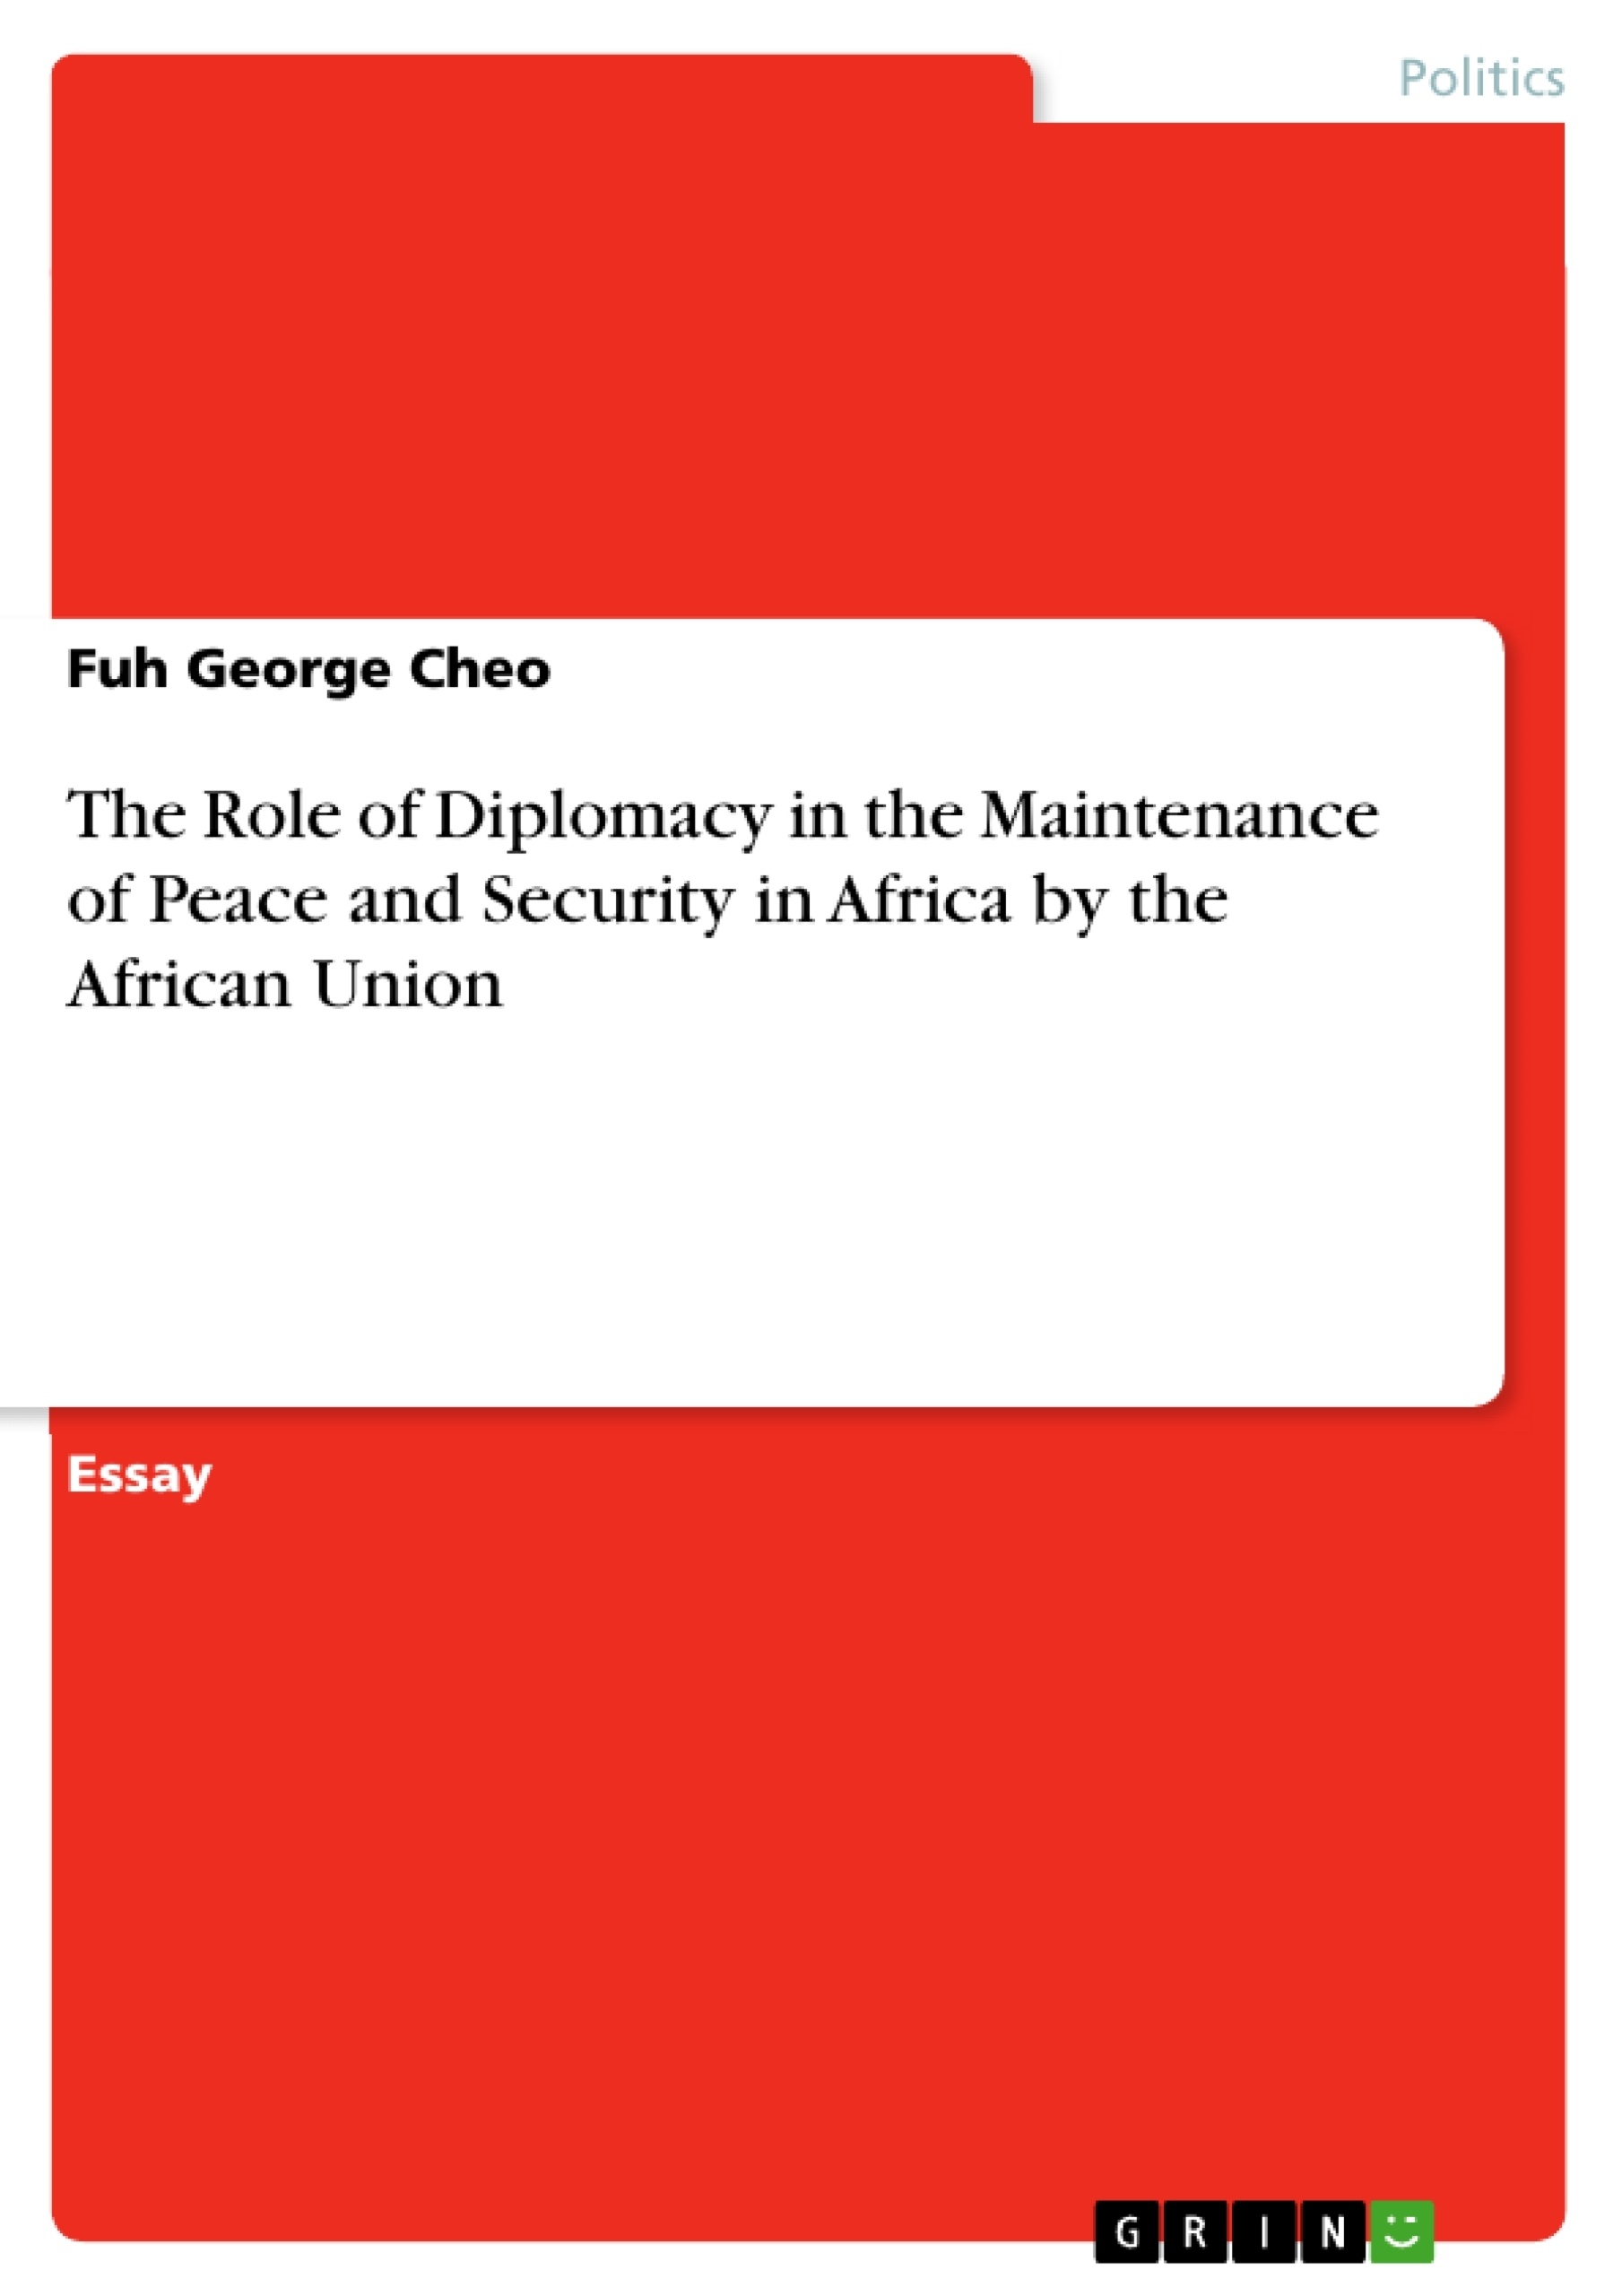 Title: The Role of Diplomacy in the Maintenance of Peace and Security in Africa by the African Union